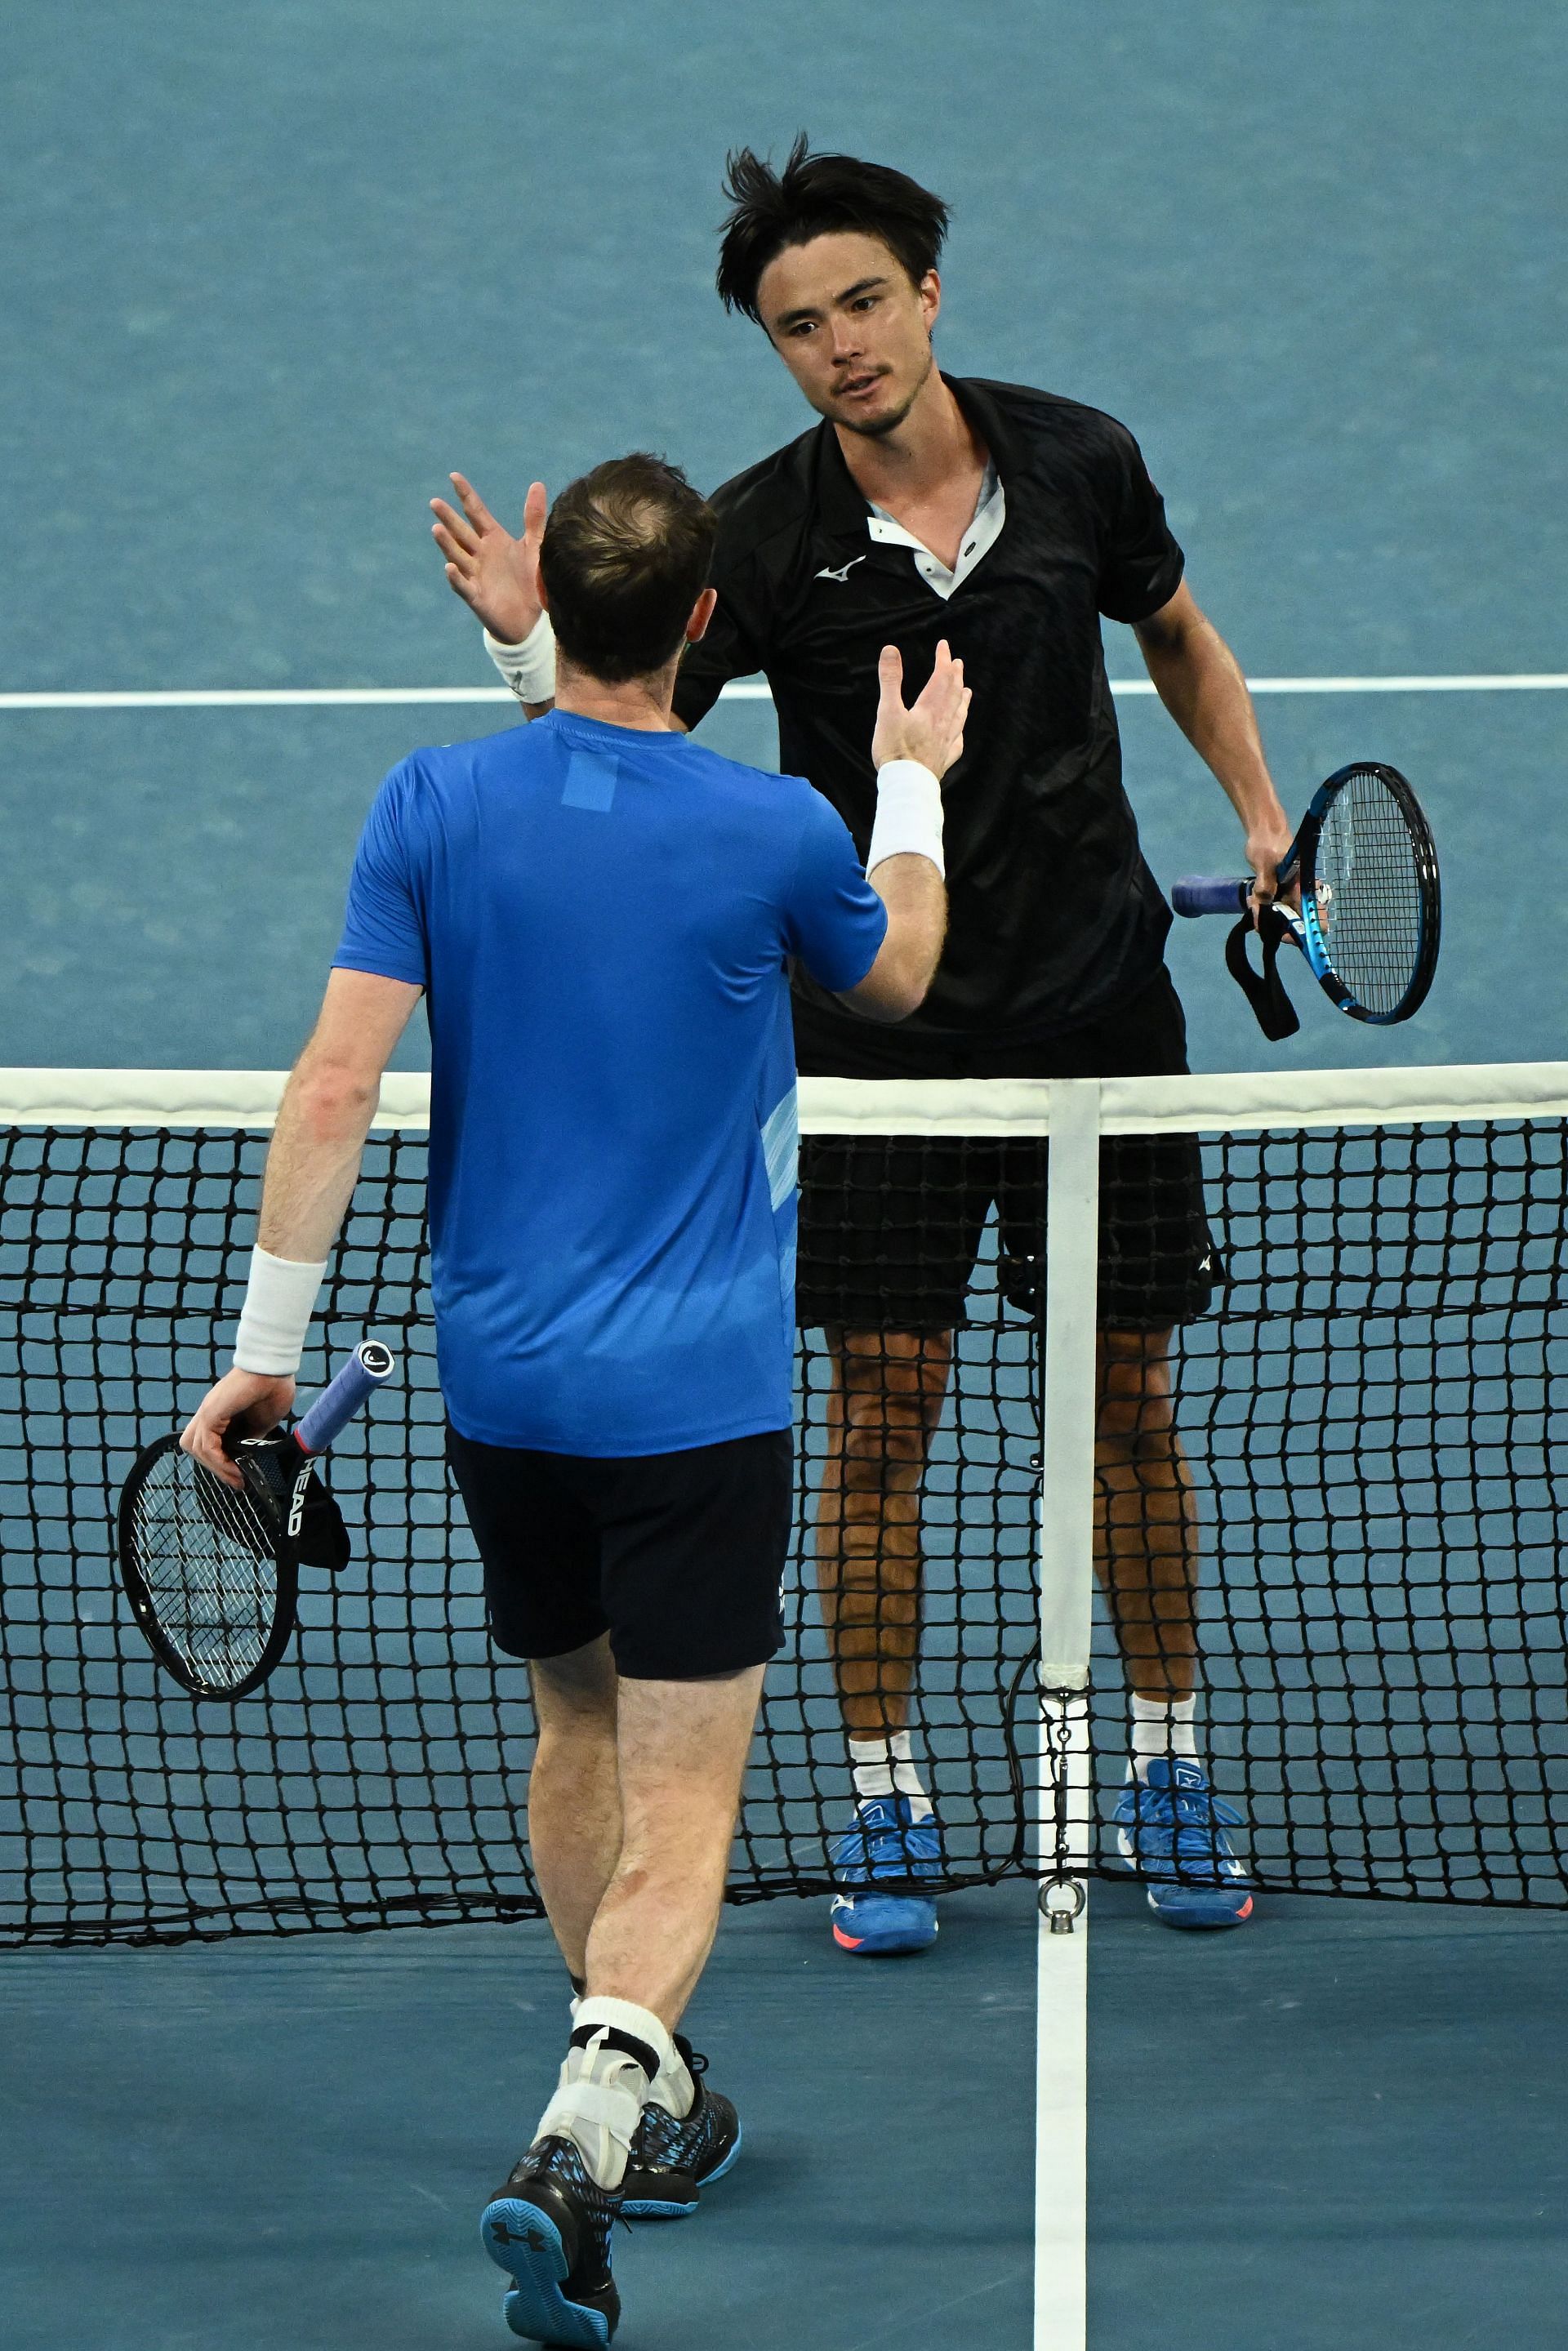 Andy Murray and Taro Daniel at the net following their second-round match at the 2022 Australian Open